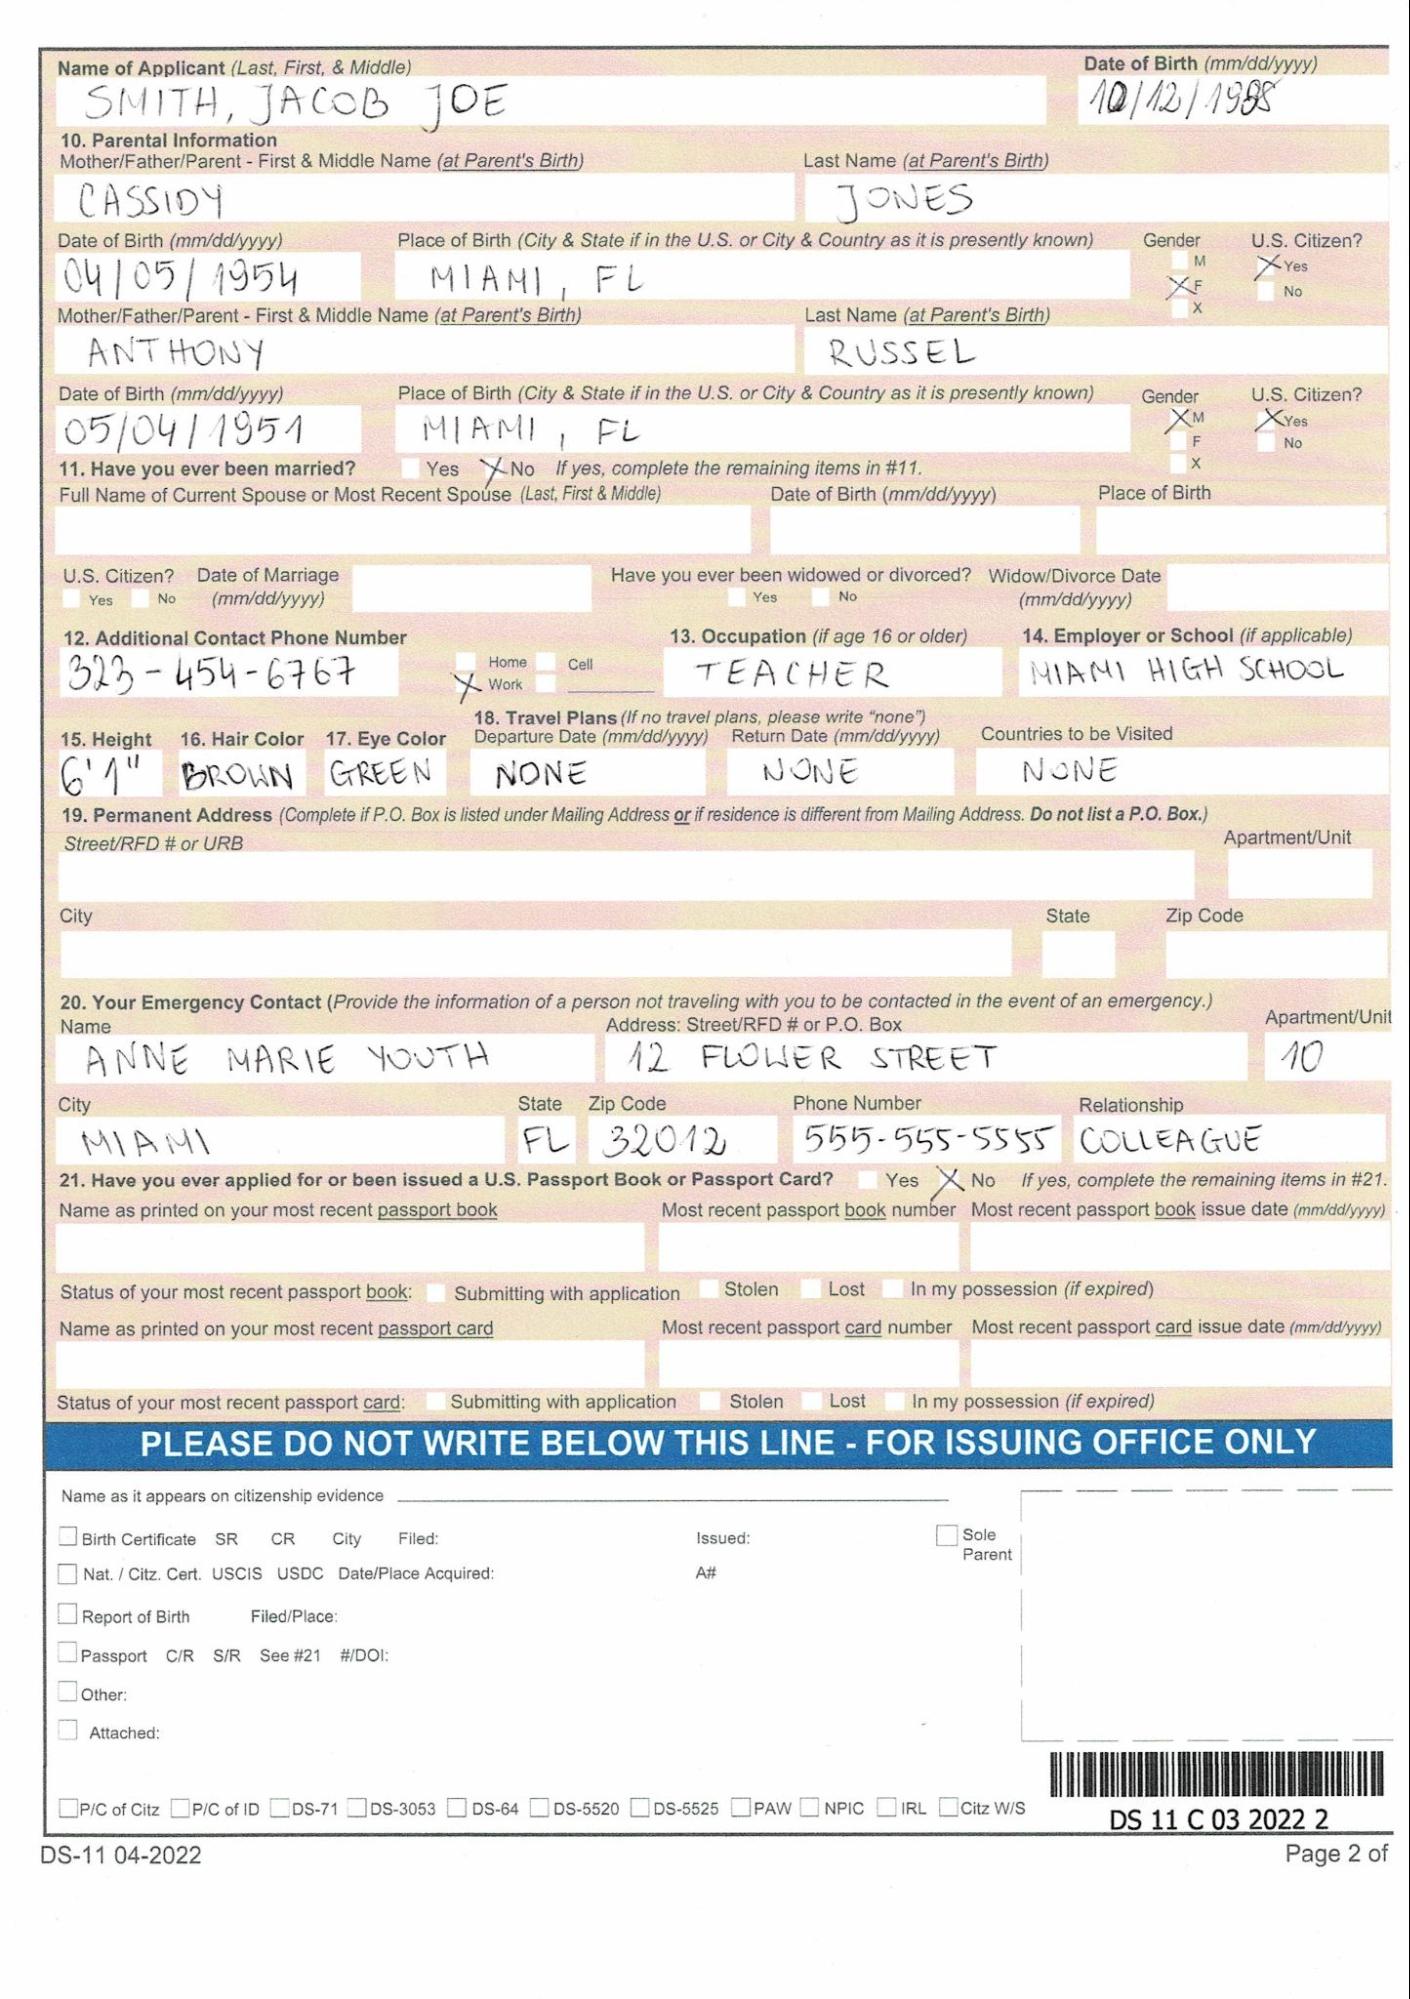 An example of page 2 of a DS-11 form filled out.